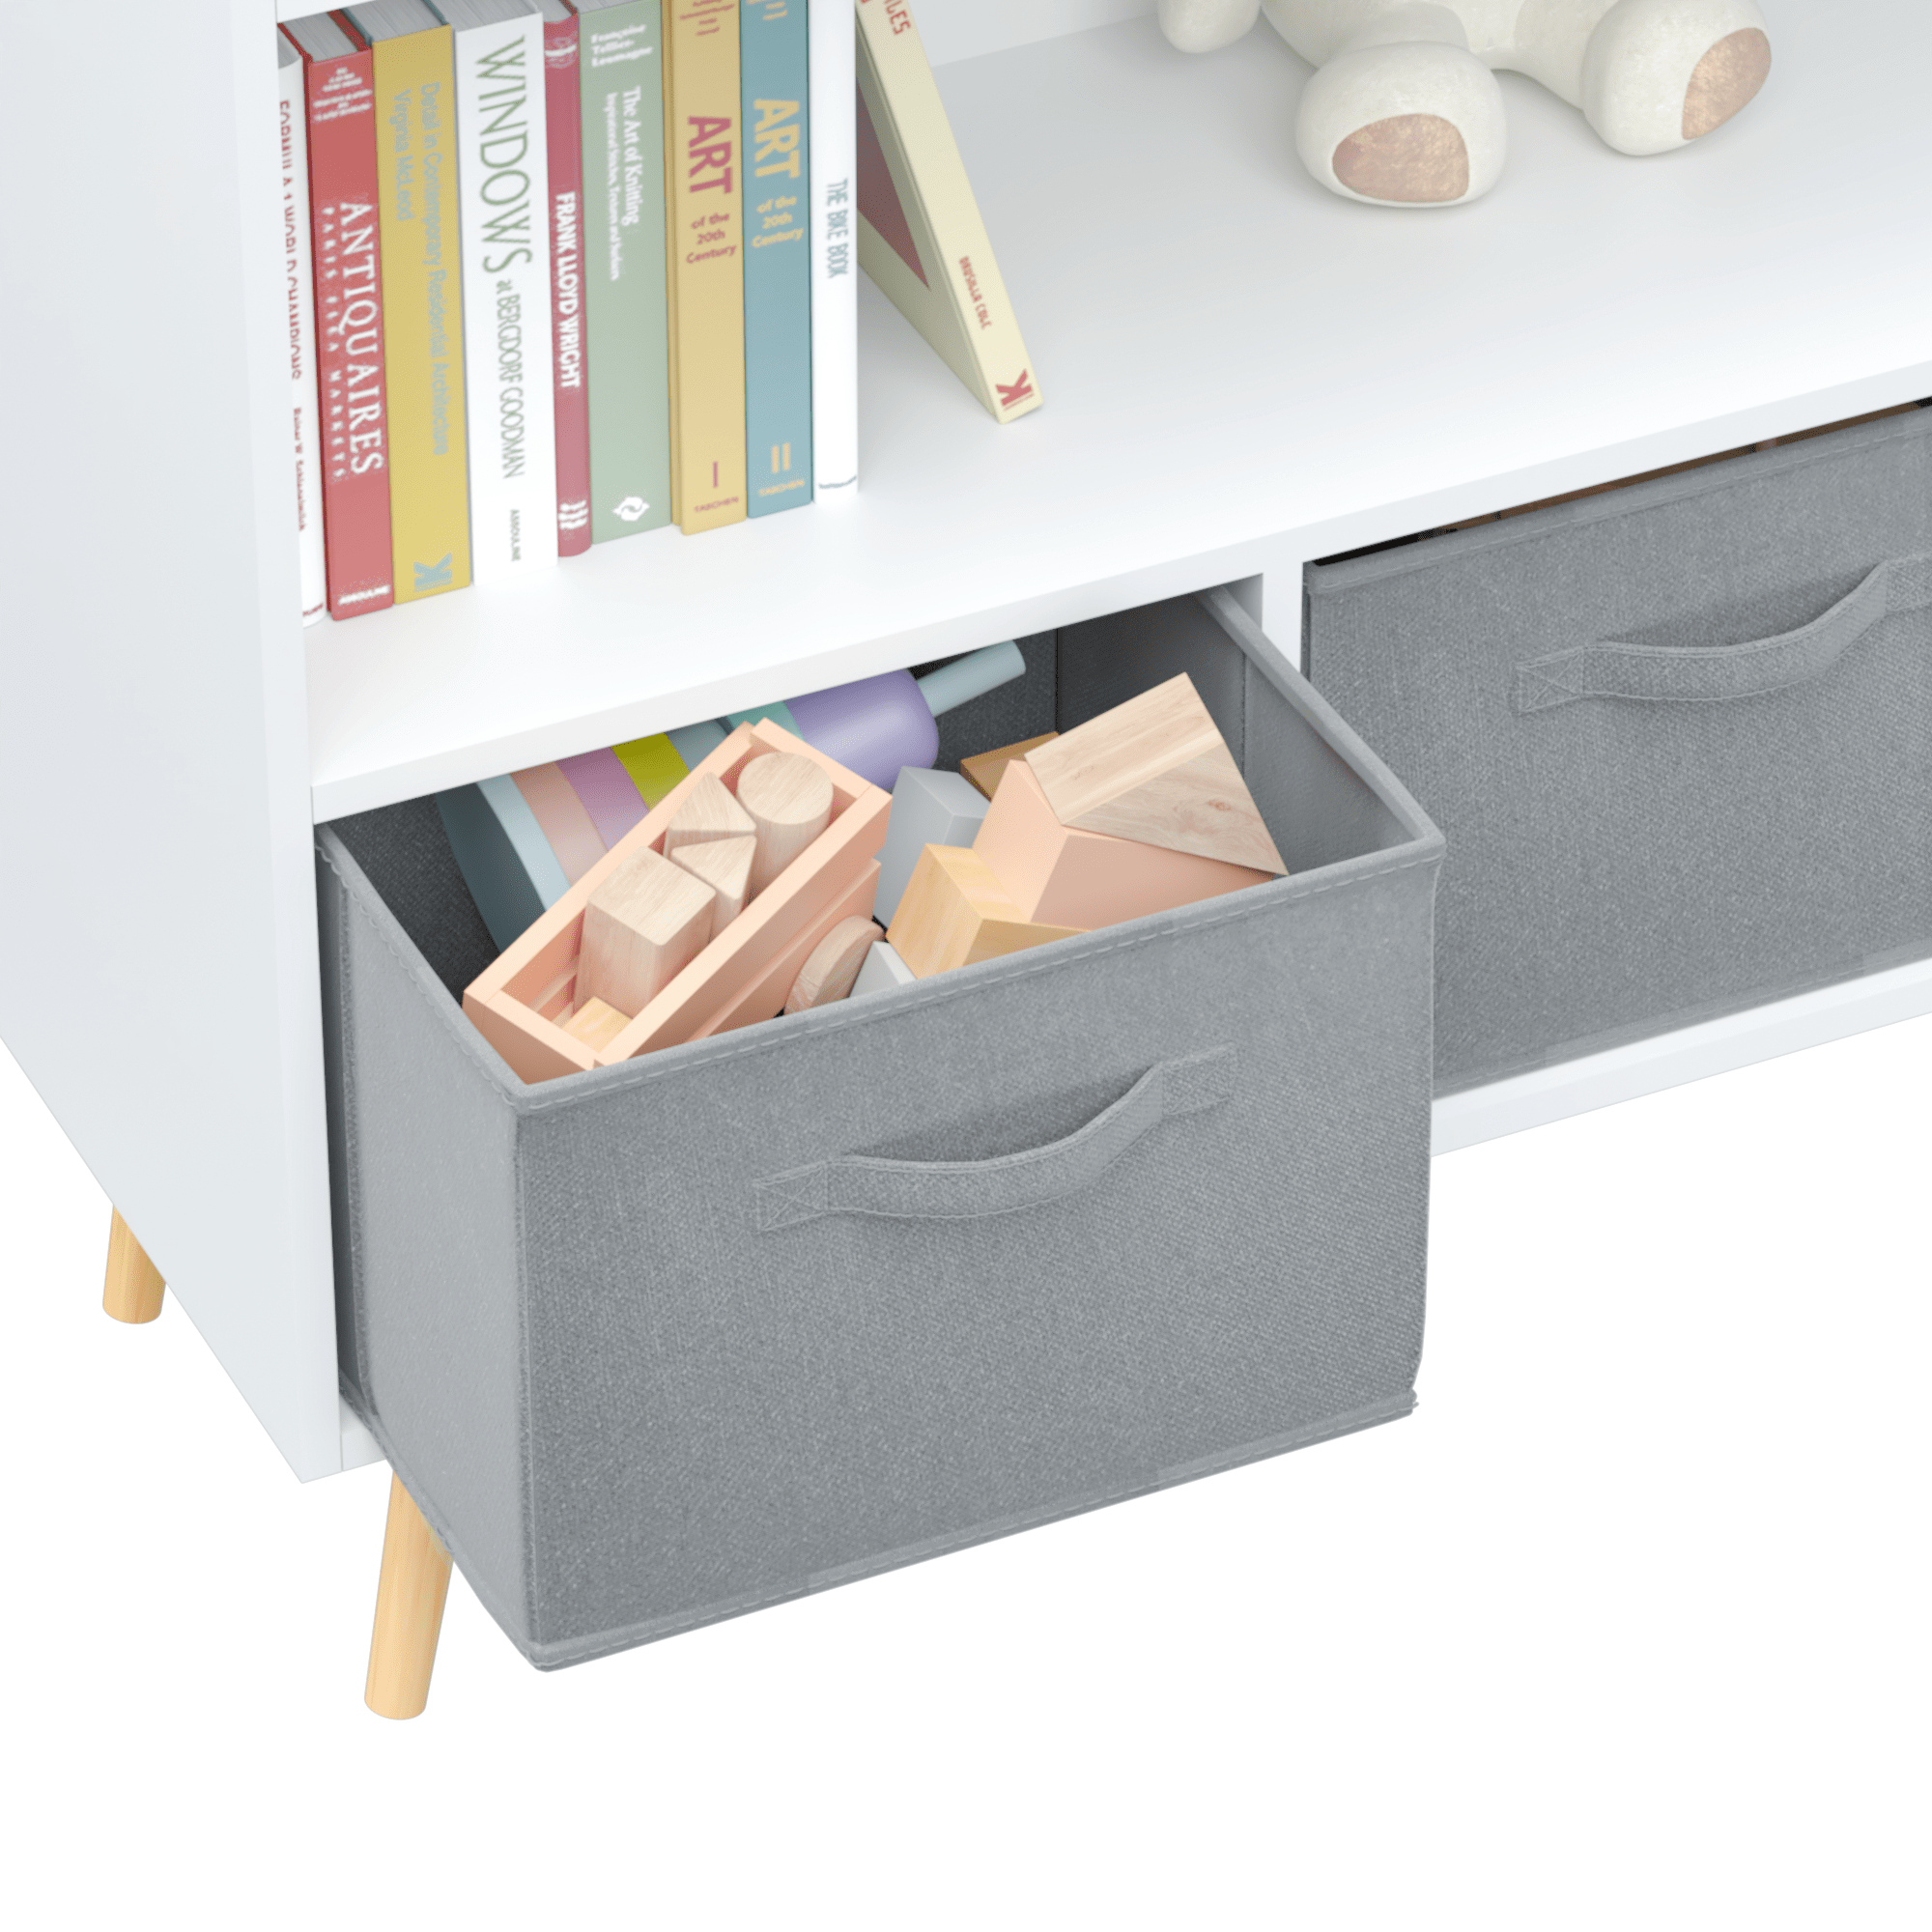 Kids bookcase with Collapsible Fabric Drawers, Children's Book Display, Toy Storage Cabinet Organizer, White/Gray